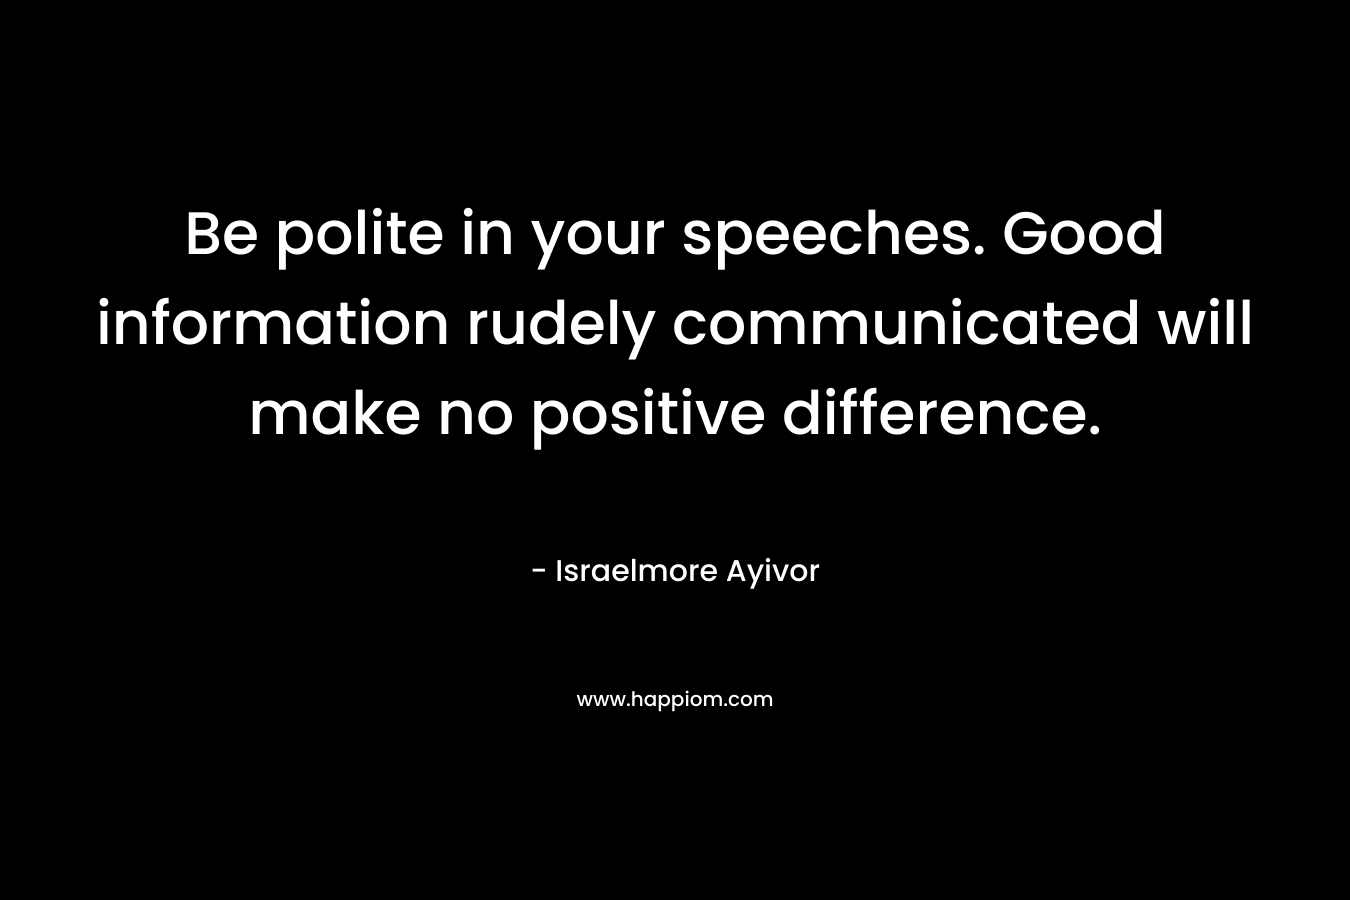 Be polite in your speeches. Good information rudely communicated will make no positive difference.